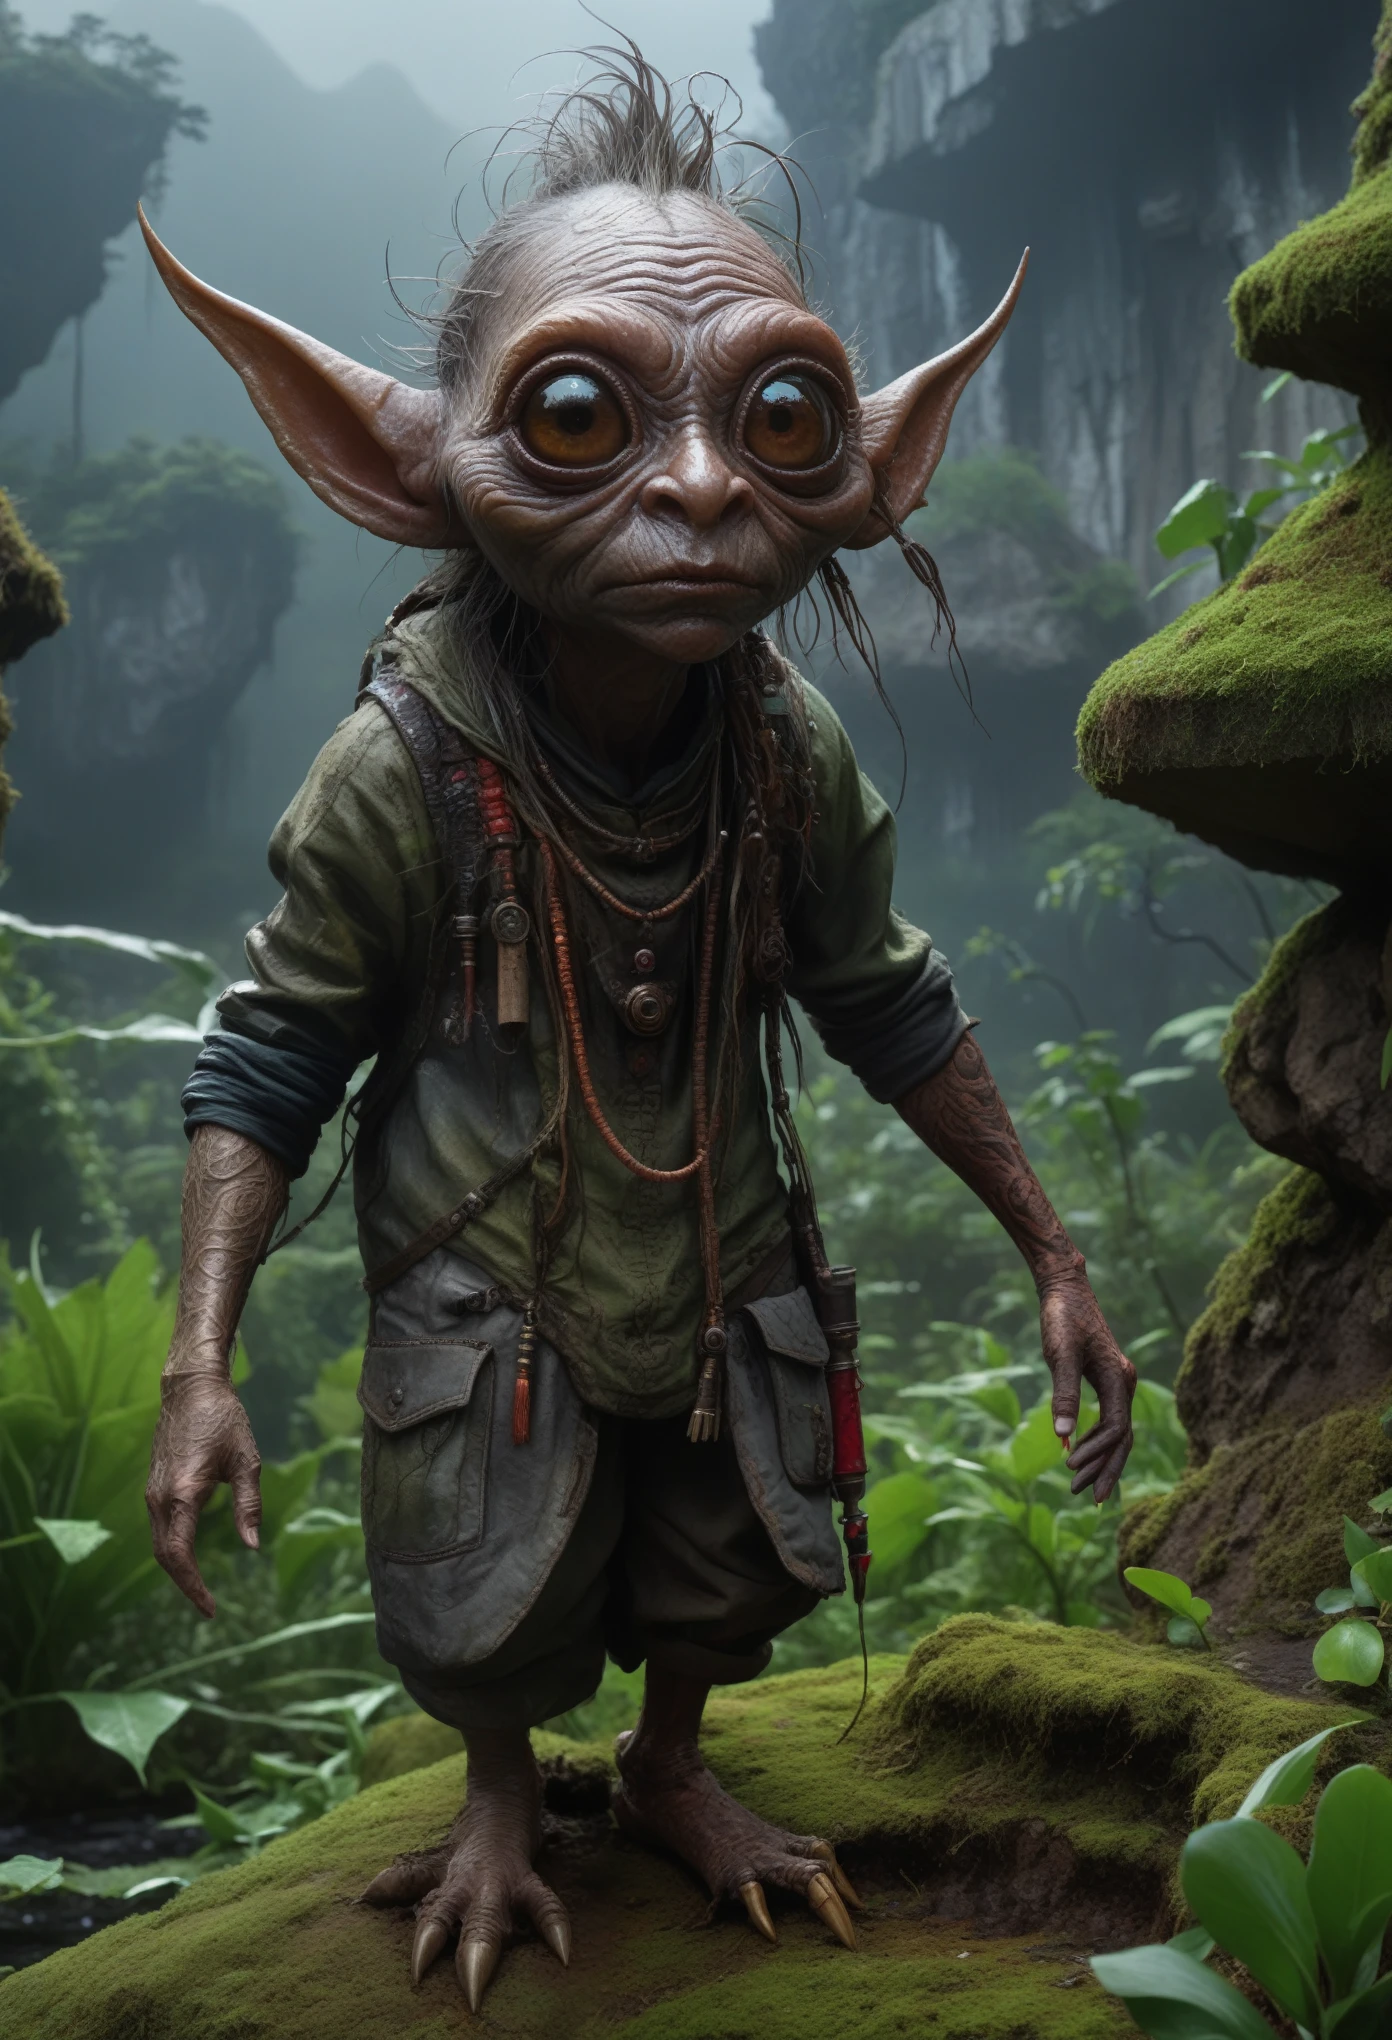 full-body-shot,Very tall , who can't fly,Cinematic, Technicolor,natural skin textures, hyper realisitc, hyper detailed,Extremely detailed,High contrast,Realistic,Chalsedoon goblin, back view,full body length,evil ghost,Hobgoblin,pretty face,intricate details,realistic humid skin,extremely intricate details,anatomically correct, eyes extremely detailed, high detailed eyes,High contrast,Ultra HD,Retina,HDR,photo,photorealism,Masterpiece, natural skin textures, hyper realism,hyper detailed,High contrast,(HDR:1.4),Realism,Ultra Detailed,irina yermolova, close full body shot,16K resolution,RAW, Nikon Z9,Paul Zizka,full body length,niobium goblin,native irish,pretty face,eyebrow up,full body shot,ominous landscape,niobium gray atmosphere,by art Simon Stalenhag,Nicola Samori,(((Wangechi Mutu))),prime colors,urban,extremely detailed,masterpiece,intricate details,faded,eyes extremely detailed, high detailed eyes,4k resolution,islands levitating above ground, Nikon Z9,scary village,stalker,Stone Forest in Yunnan Province of China